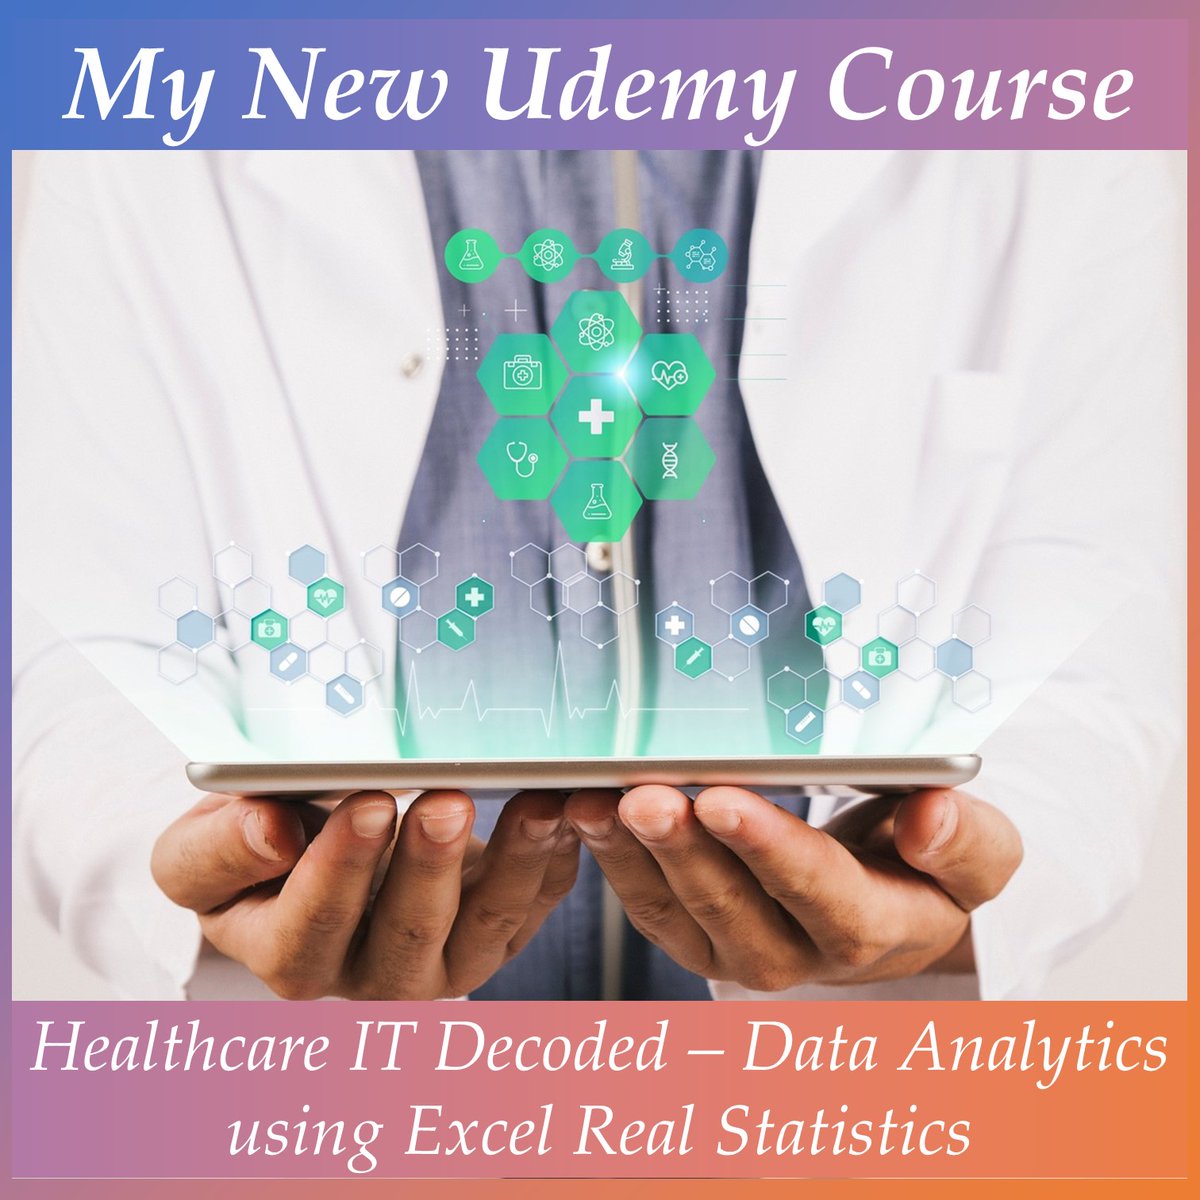 Purchase my new Course on #Udemy - Healthcare IT Decoded using Excel Real Statistics at a discounted price (next four days).

Purchase Link: udemy.com/course/healthc…

#HealthcareITDecoded #HealthcareDecoded #healthcareanalytics #analytics #LinearRegression #Excel #MachineLearning